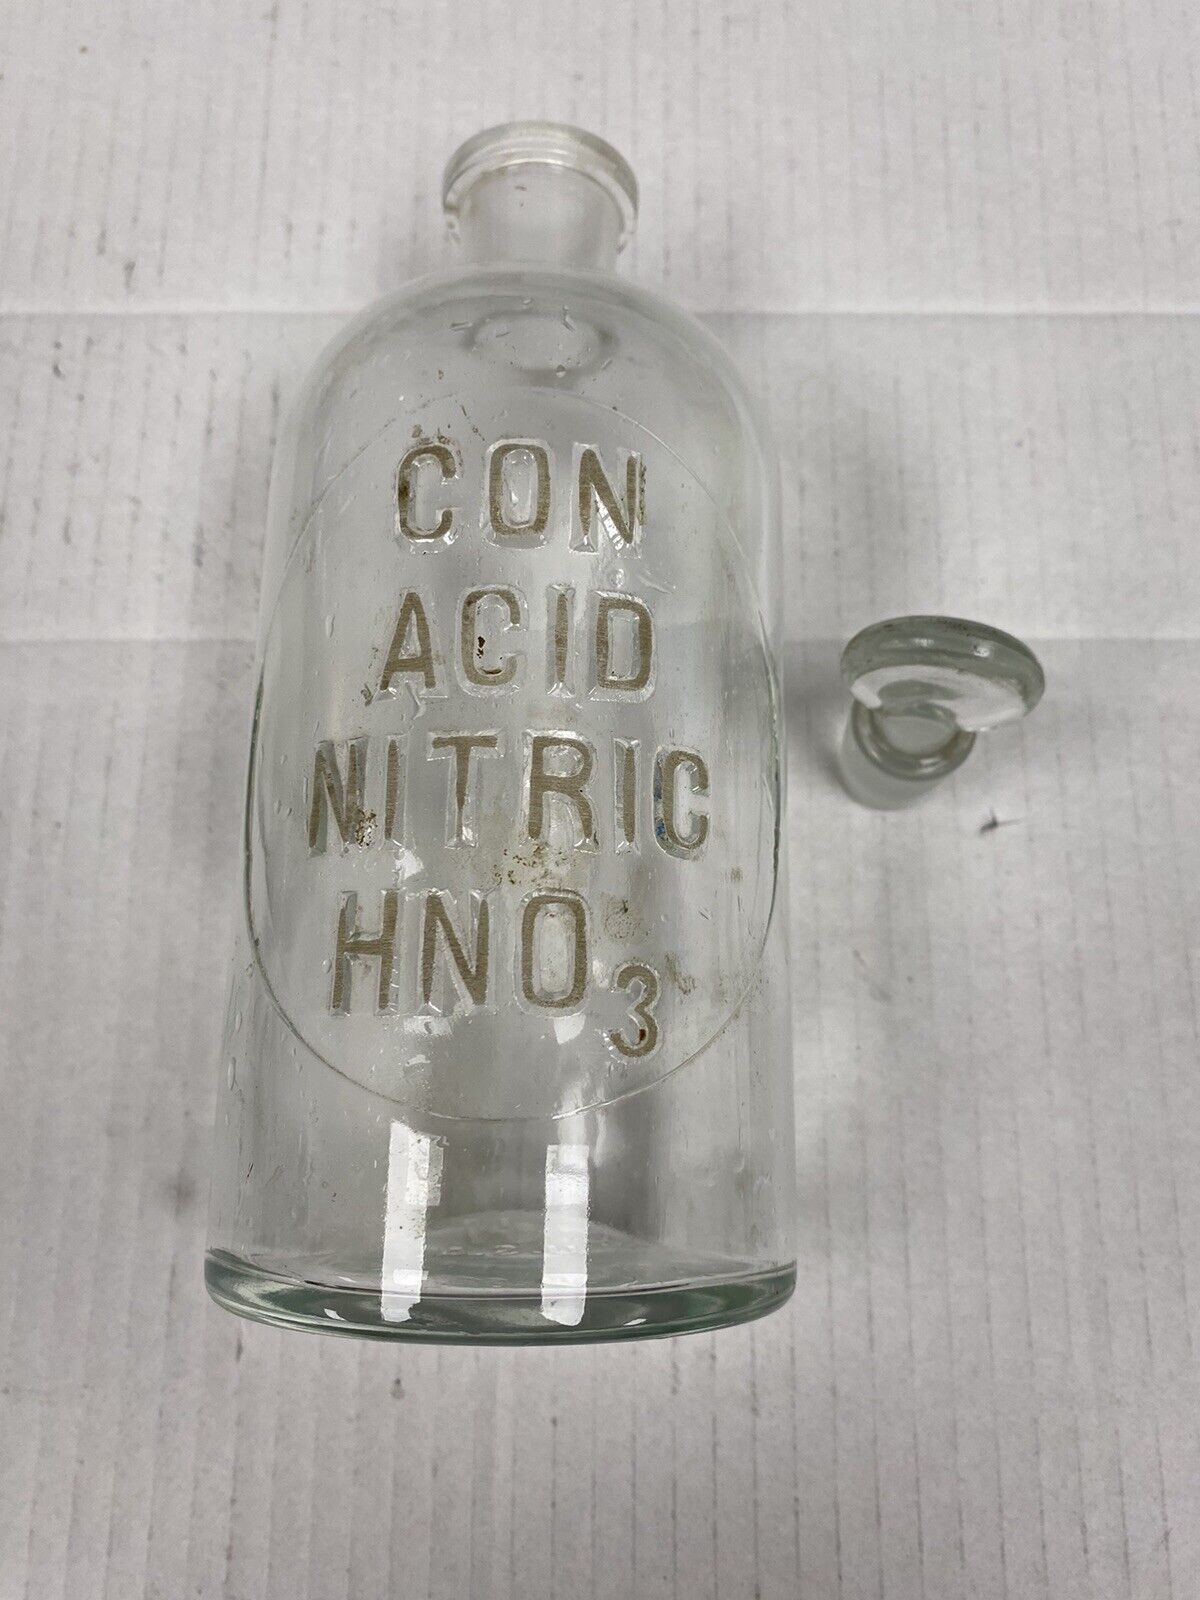 VINTAGE CON ACID NITRIC HNO3 APOTHECARY BOTTLE with STOPPER - CHEMICAL